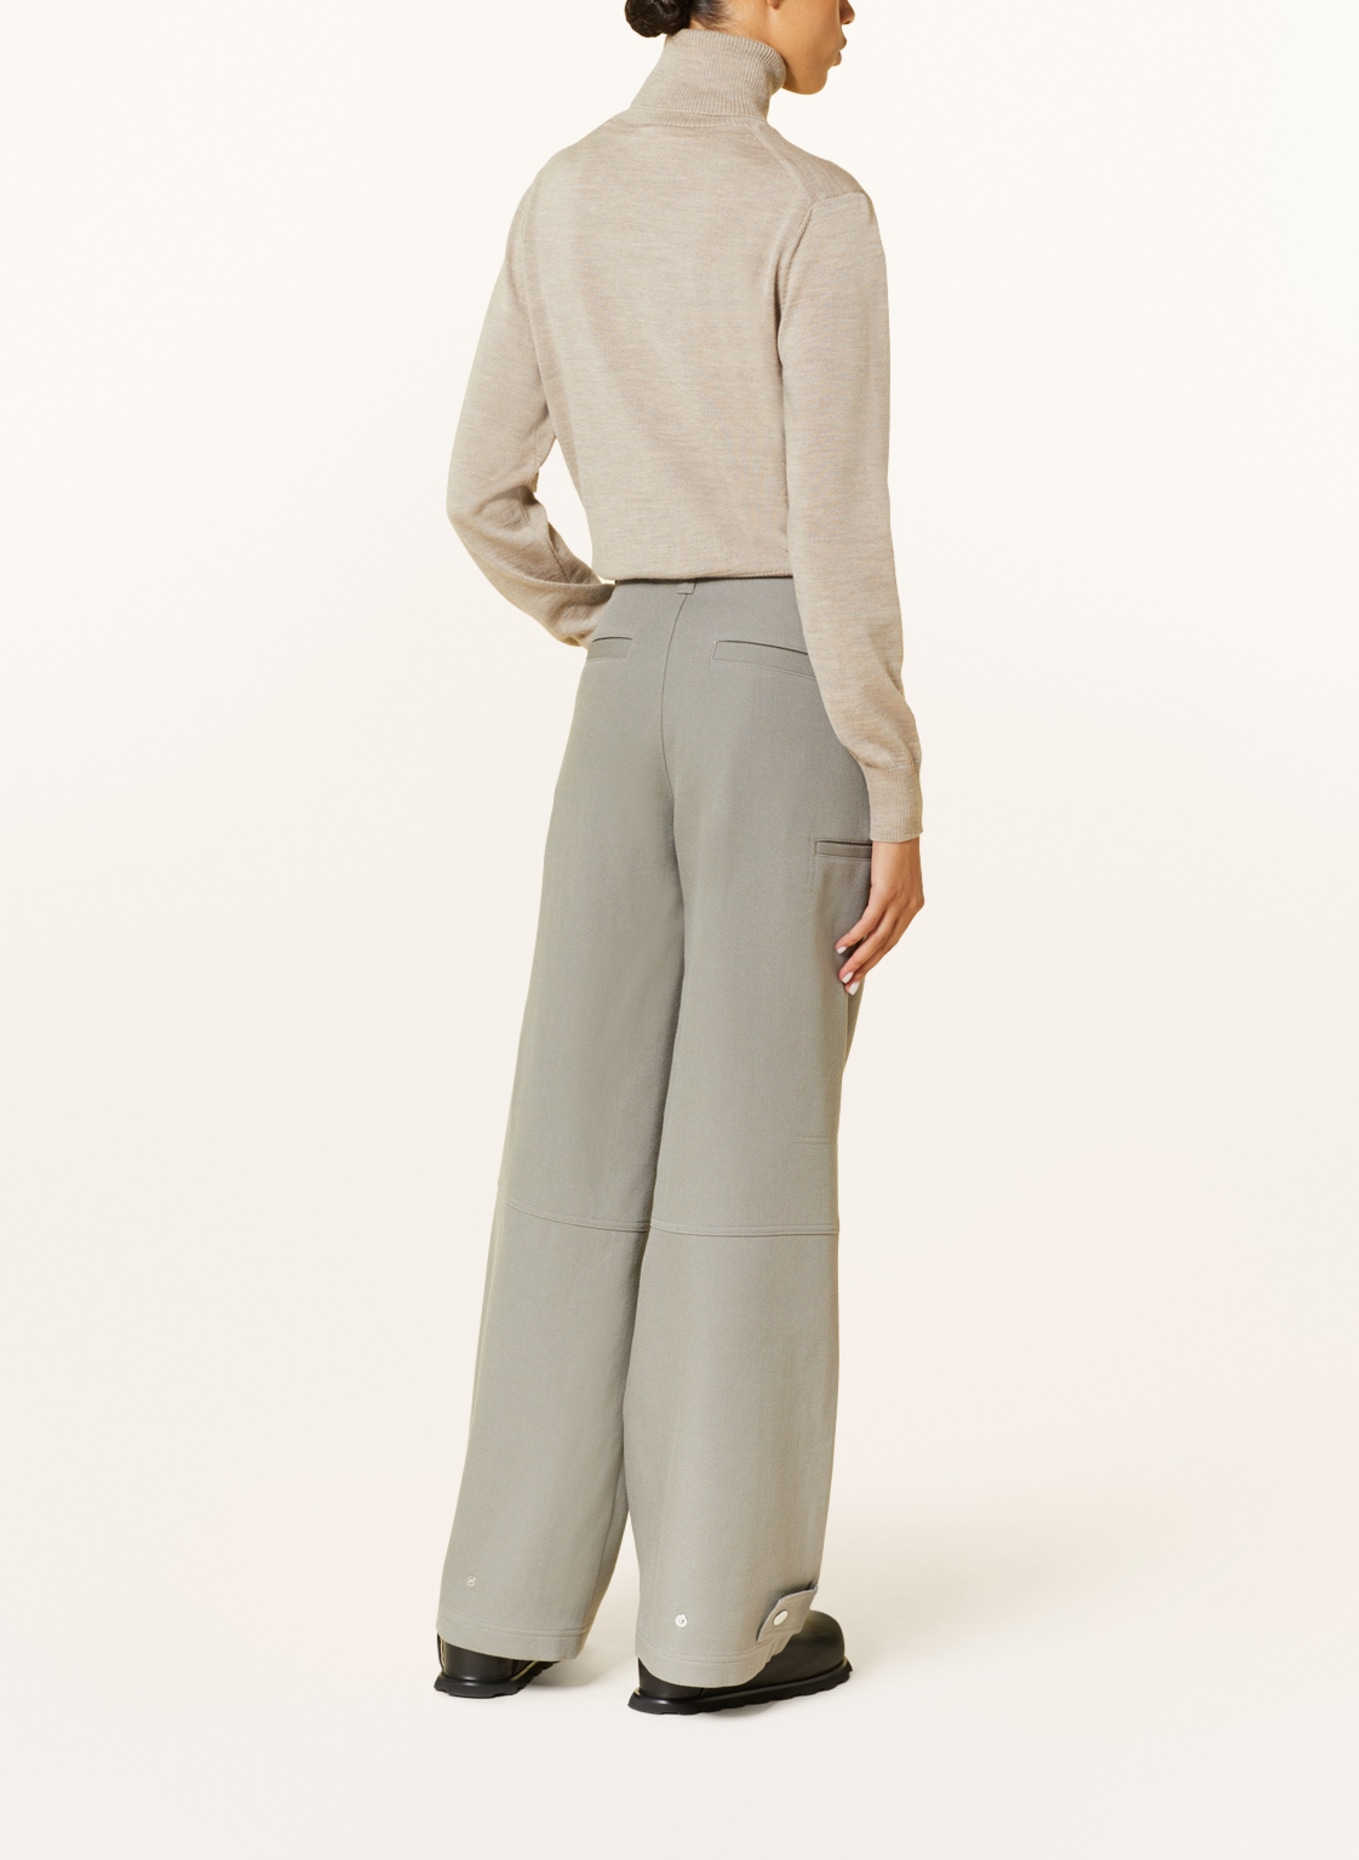 Trouser tropical wool taupe - Blugiallo - Tailoring reinvented